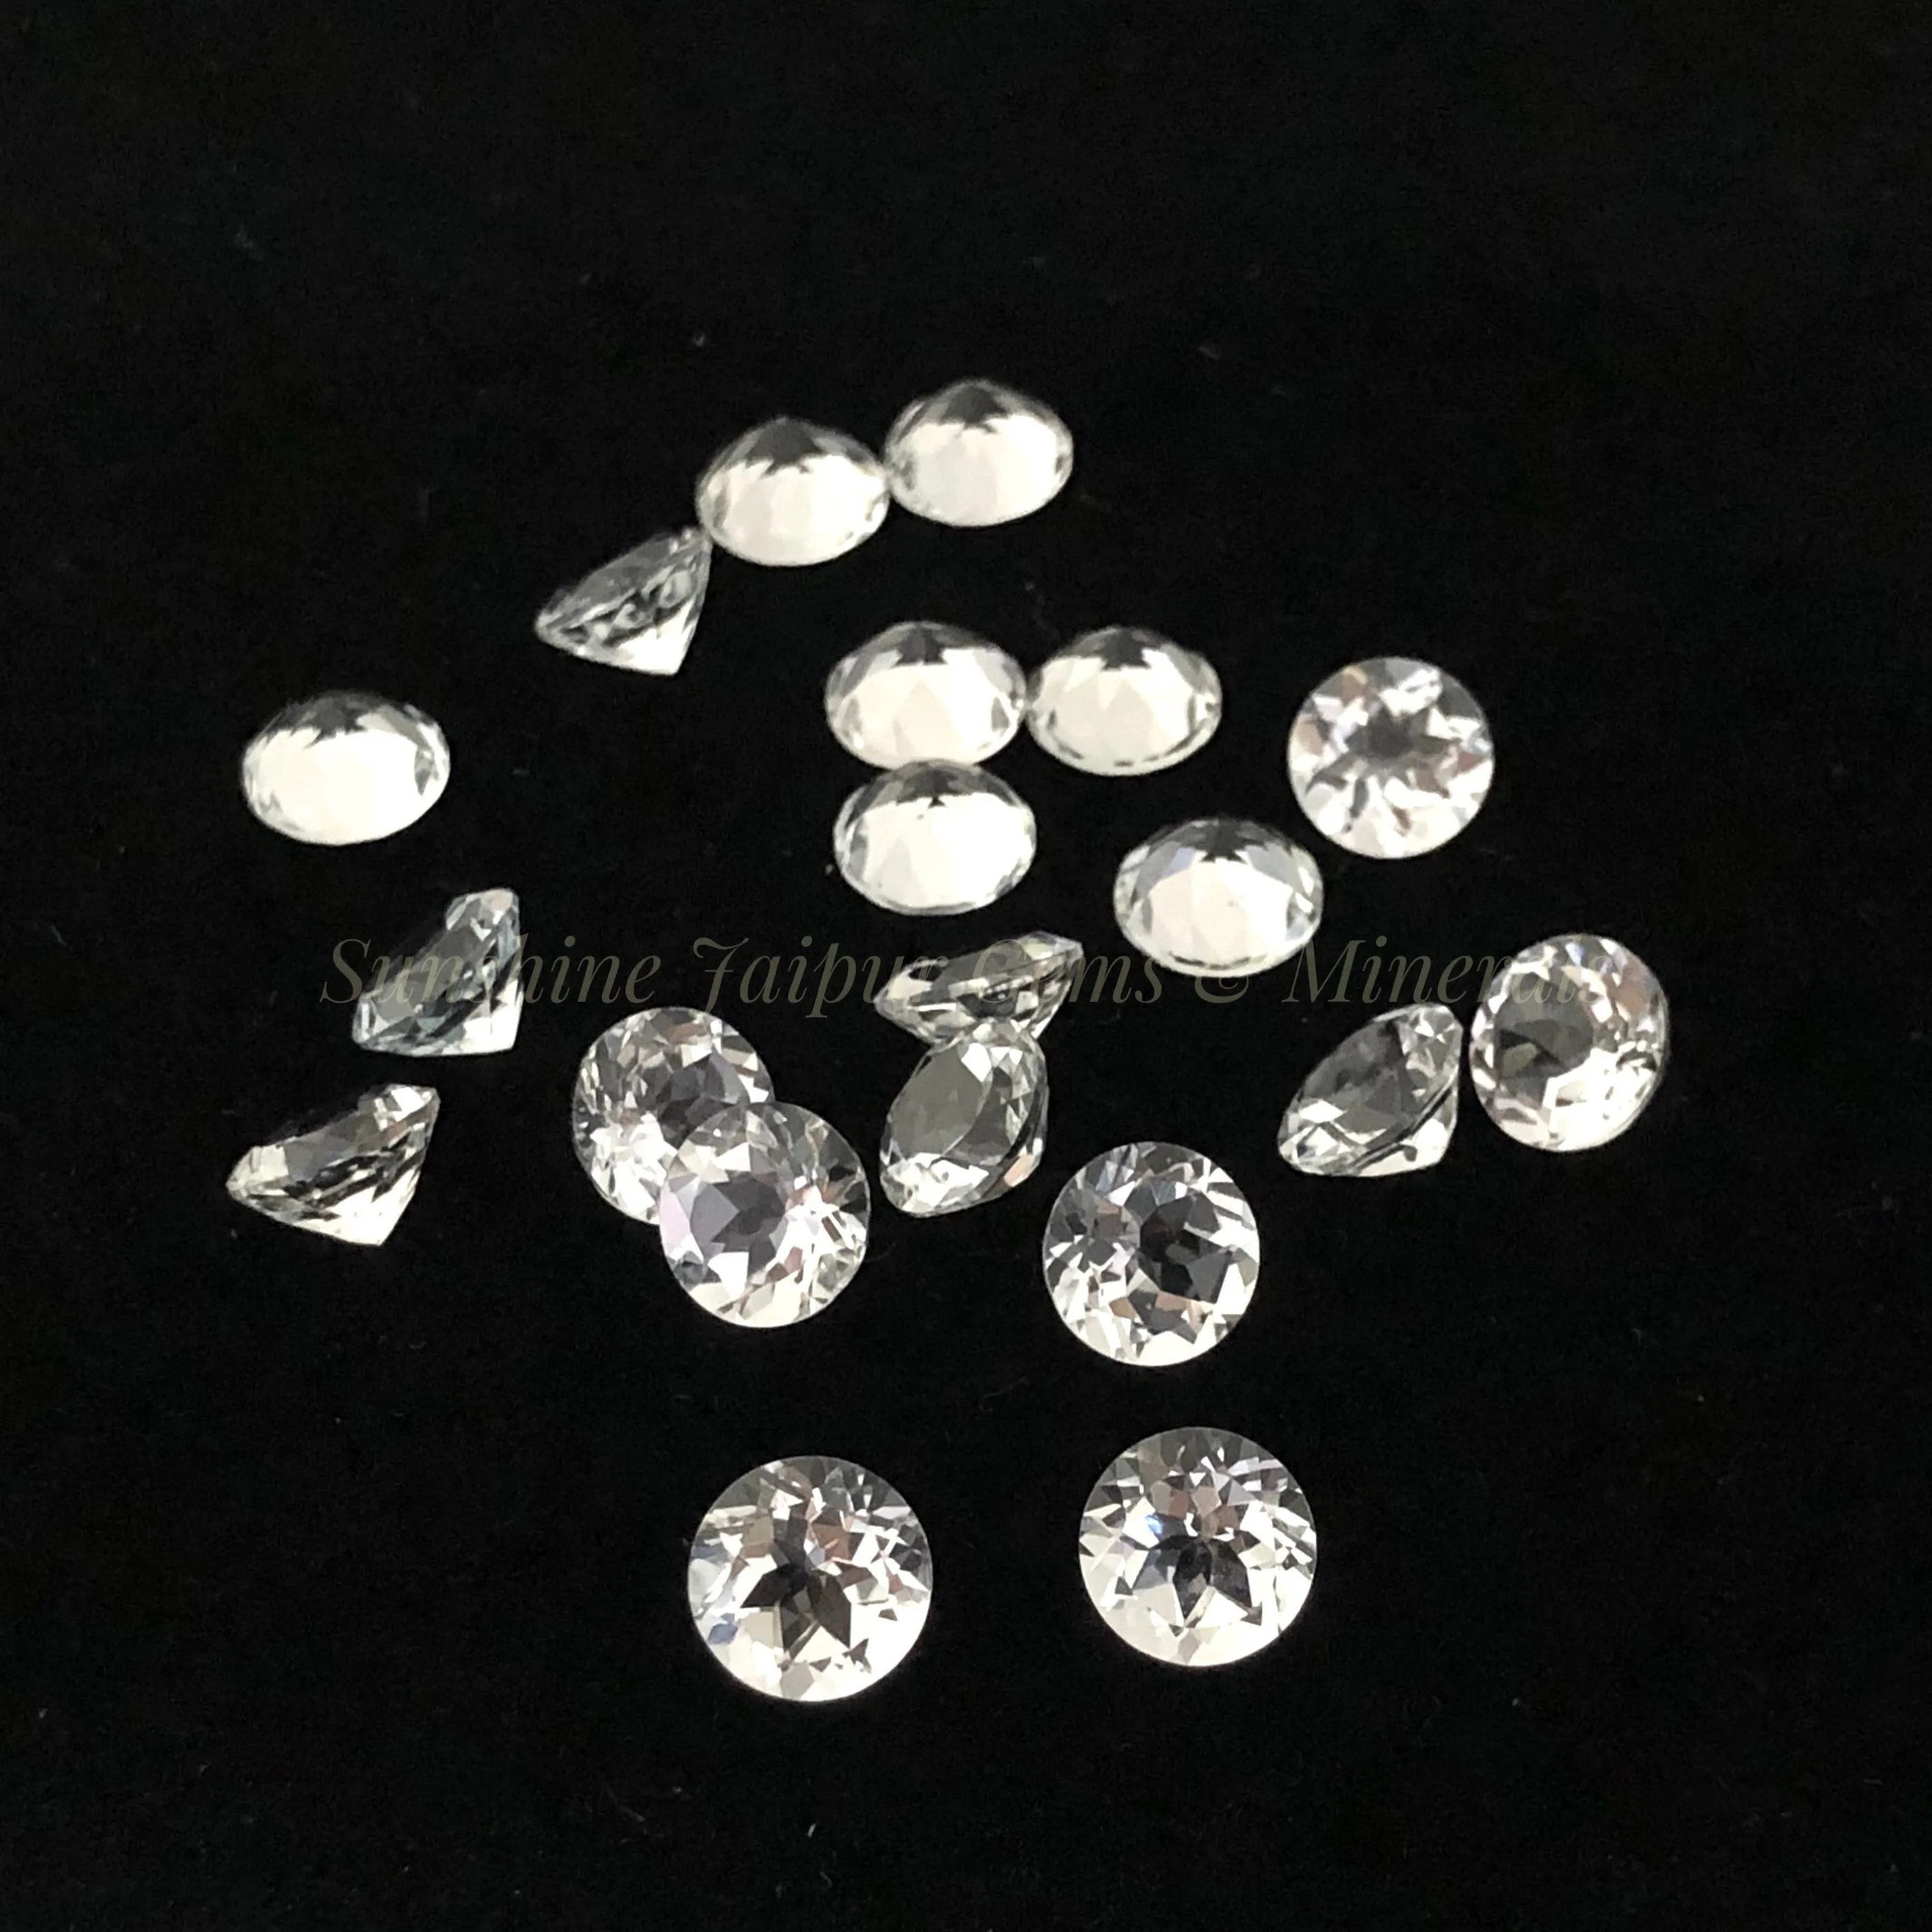 Jewelry & Beauty Faceted Briolette Crystal Loose Gems Round Shape ...